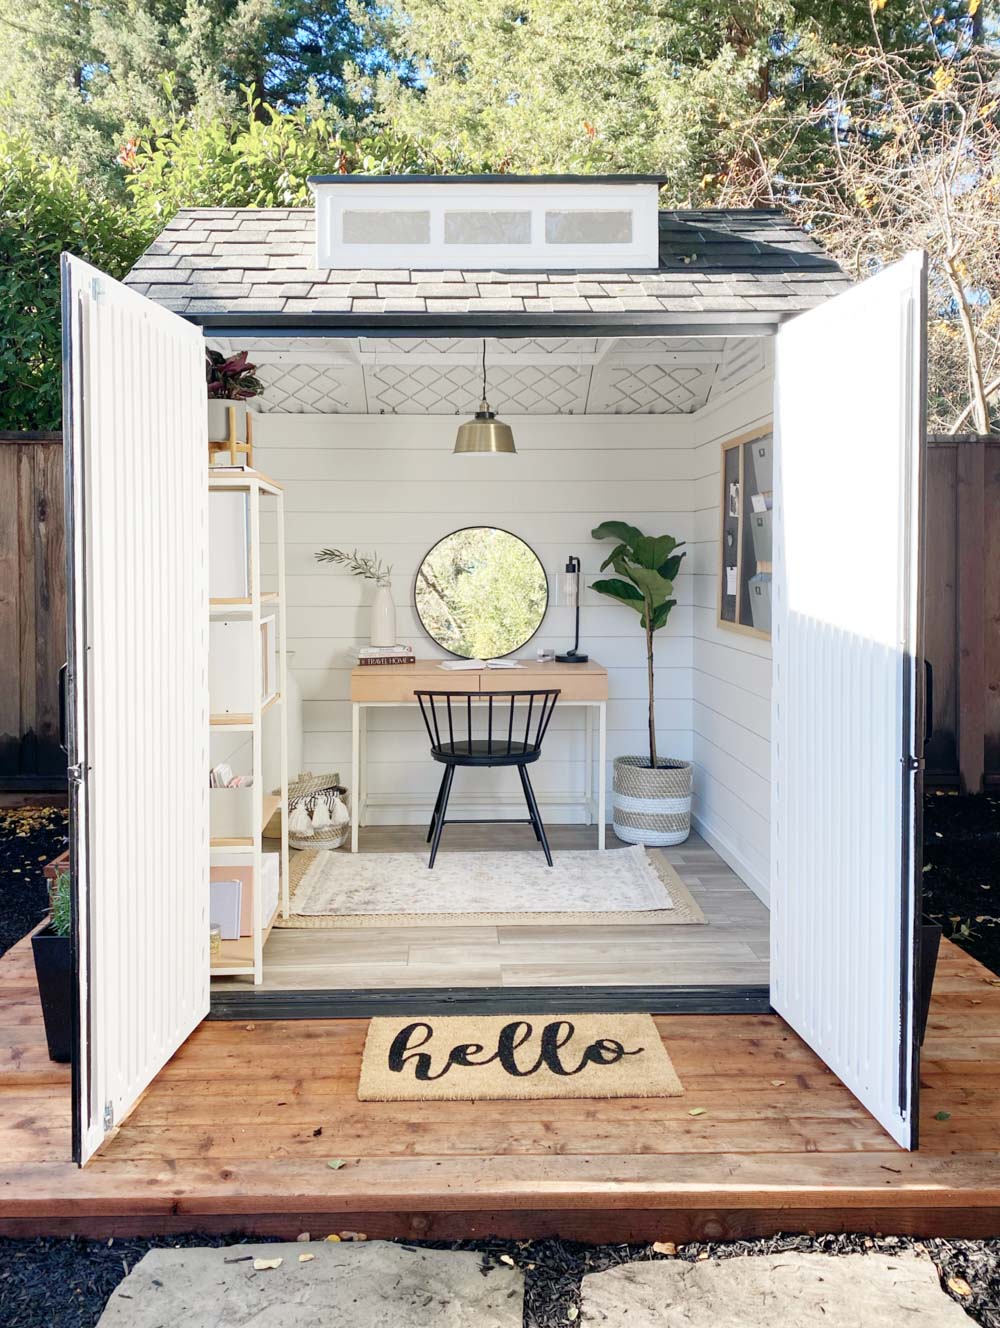 8 Best Tiny Homes at Home Depot - Home Depot Tiny House, Sheds